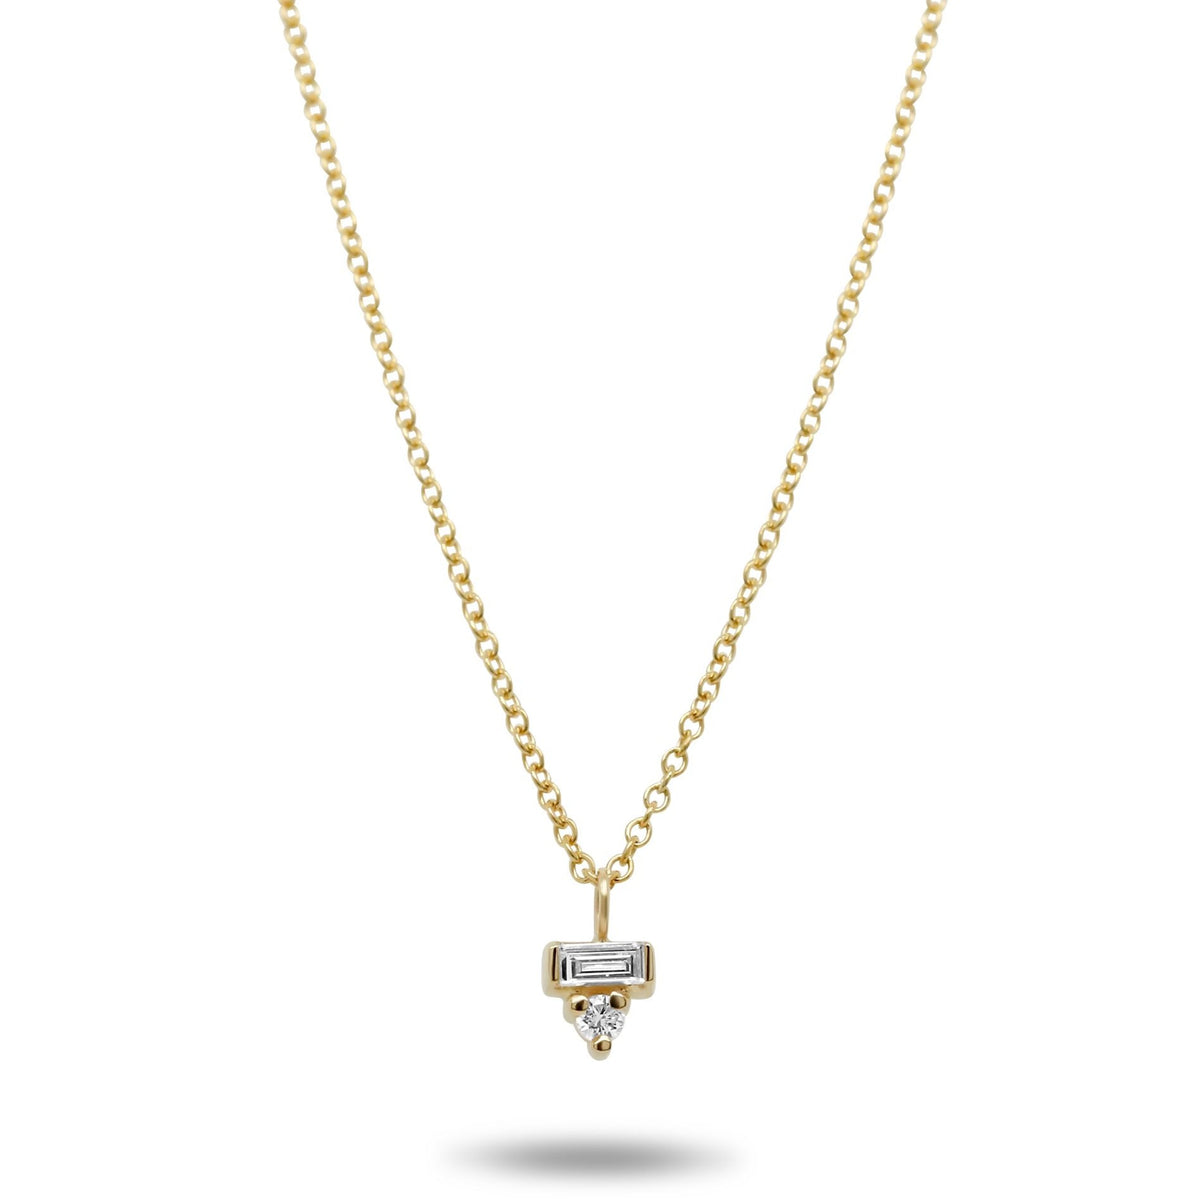 14k yellow gold baguette and round diamond dainty necklace 16in long chain under 1000